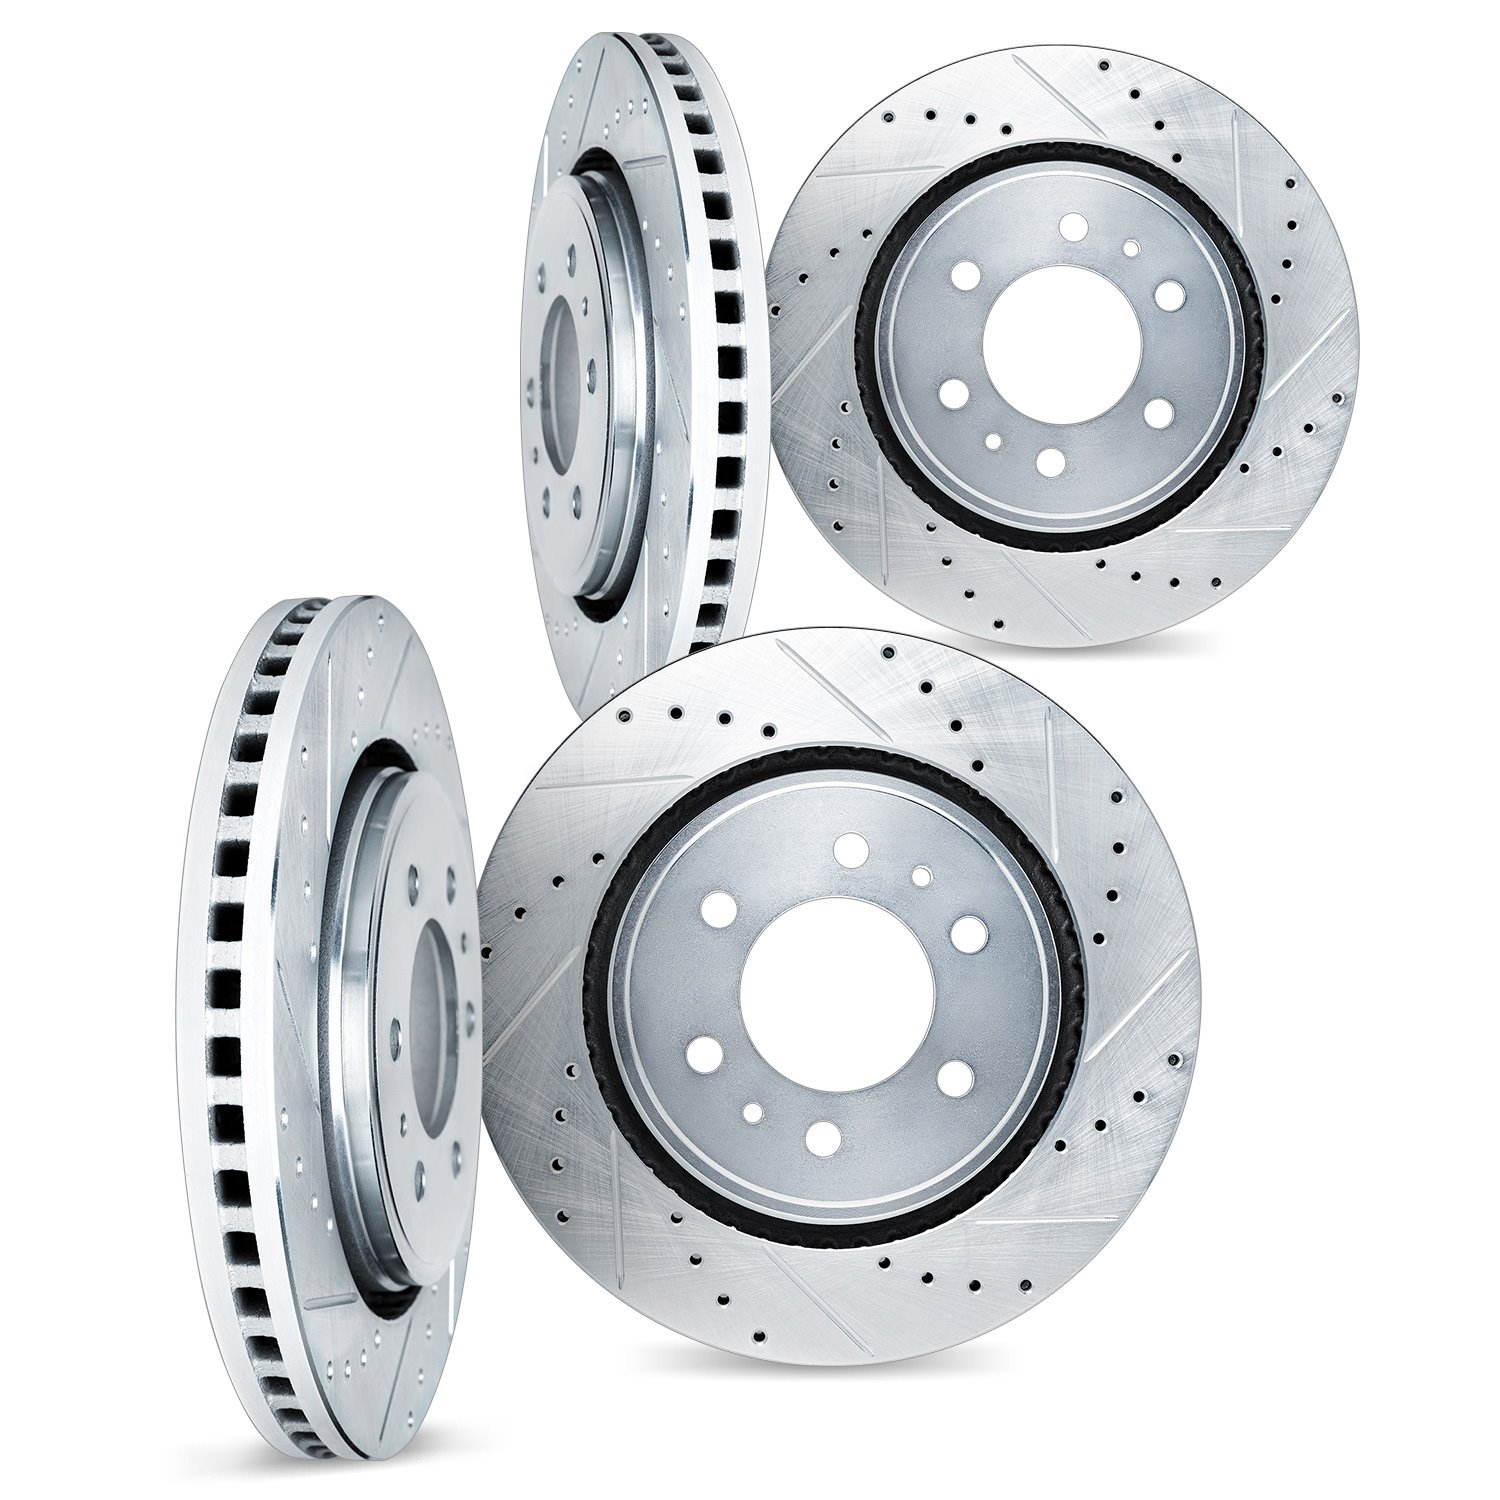 7004-54310 Drilled/Slotted Brake Rotors [Silver], Fits Select Ford/Lincoln/Mercury/Mazda, Position: Front and Rear